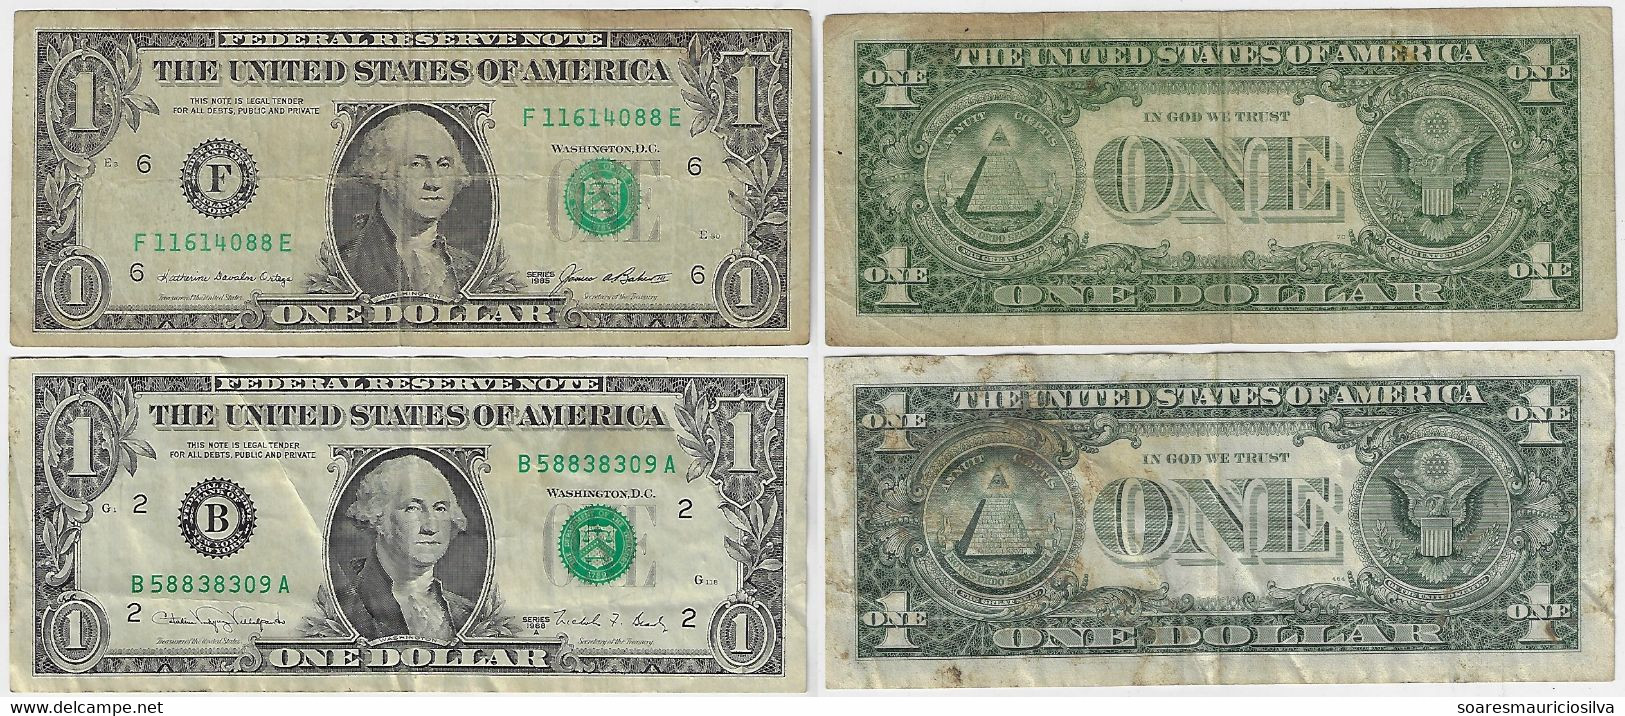 United States Of America USA 2 Banknote 1 Dollar Year 1985 Pick-474 And Year 1988A Pick-480b Both VF - National Currency